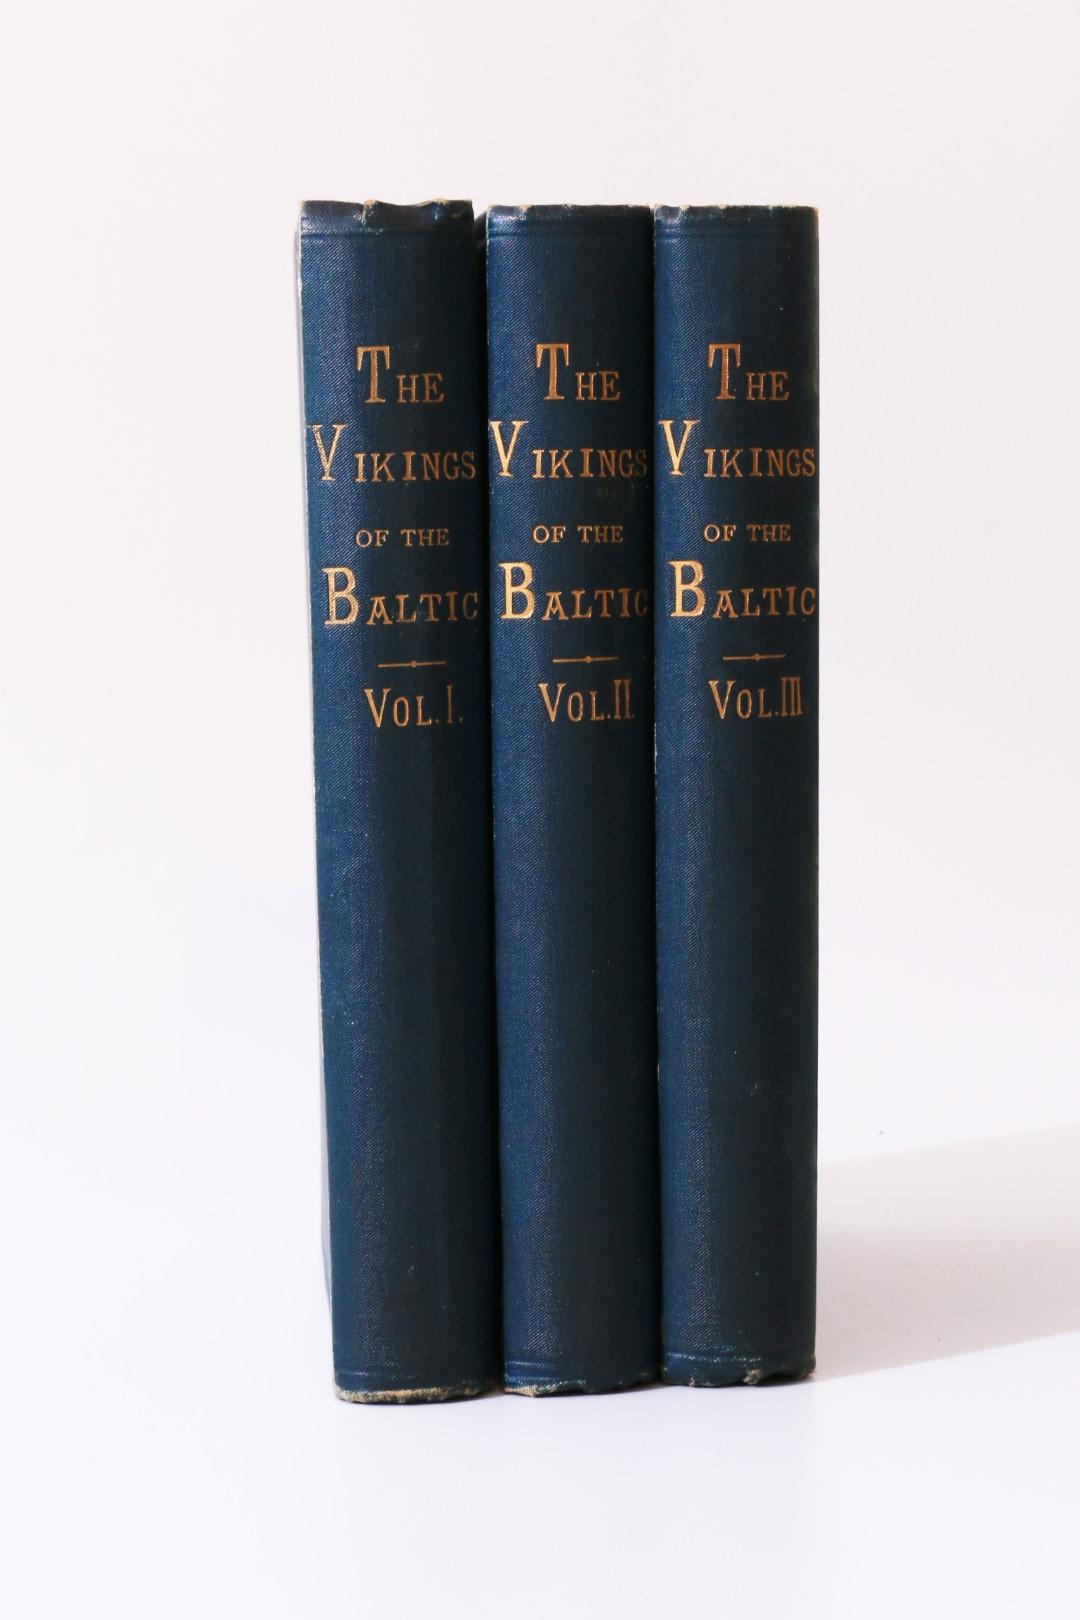 G.W. Dasent - The Vikings of the Baltic - Chapman & Hall, 1875, First Edition.